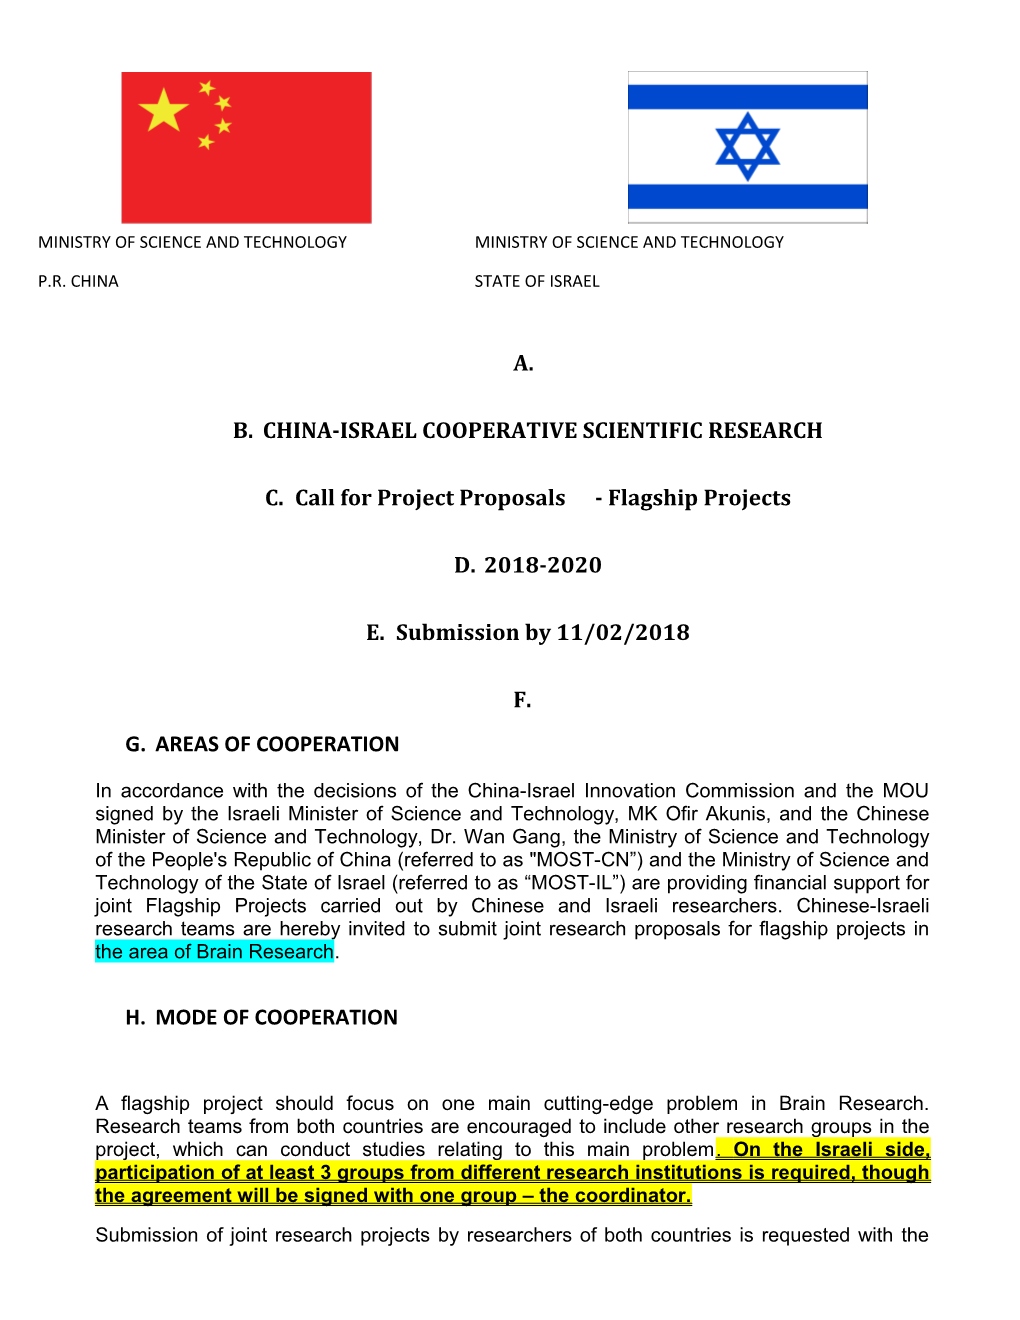 China-Israel Cooperative Scientific Research